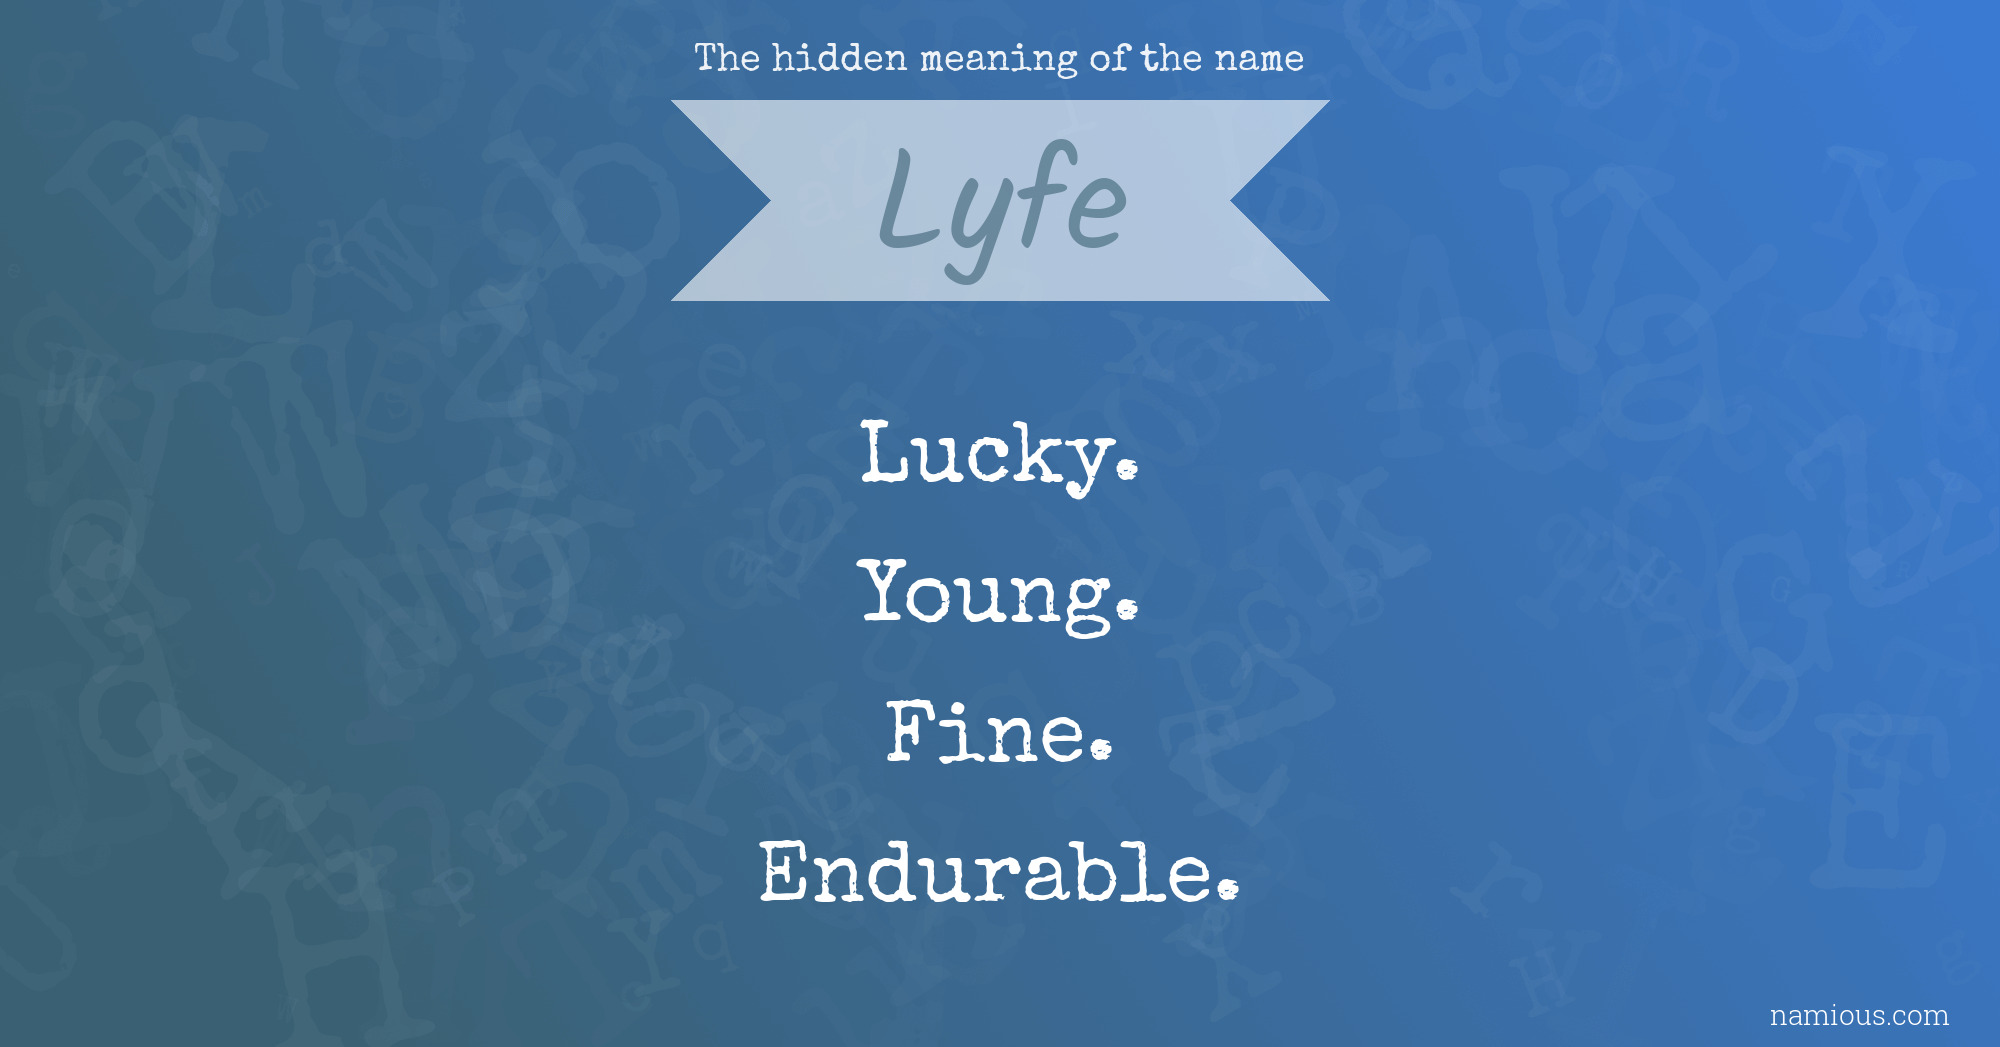 The hidden meaning of the name Lyfe